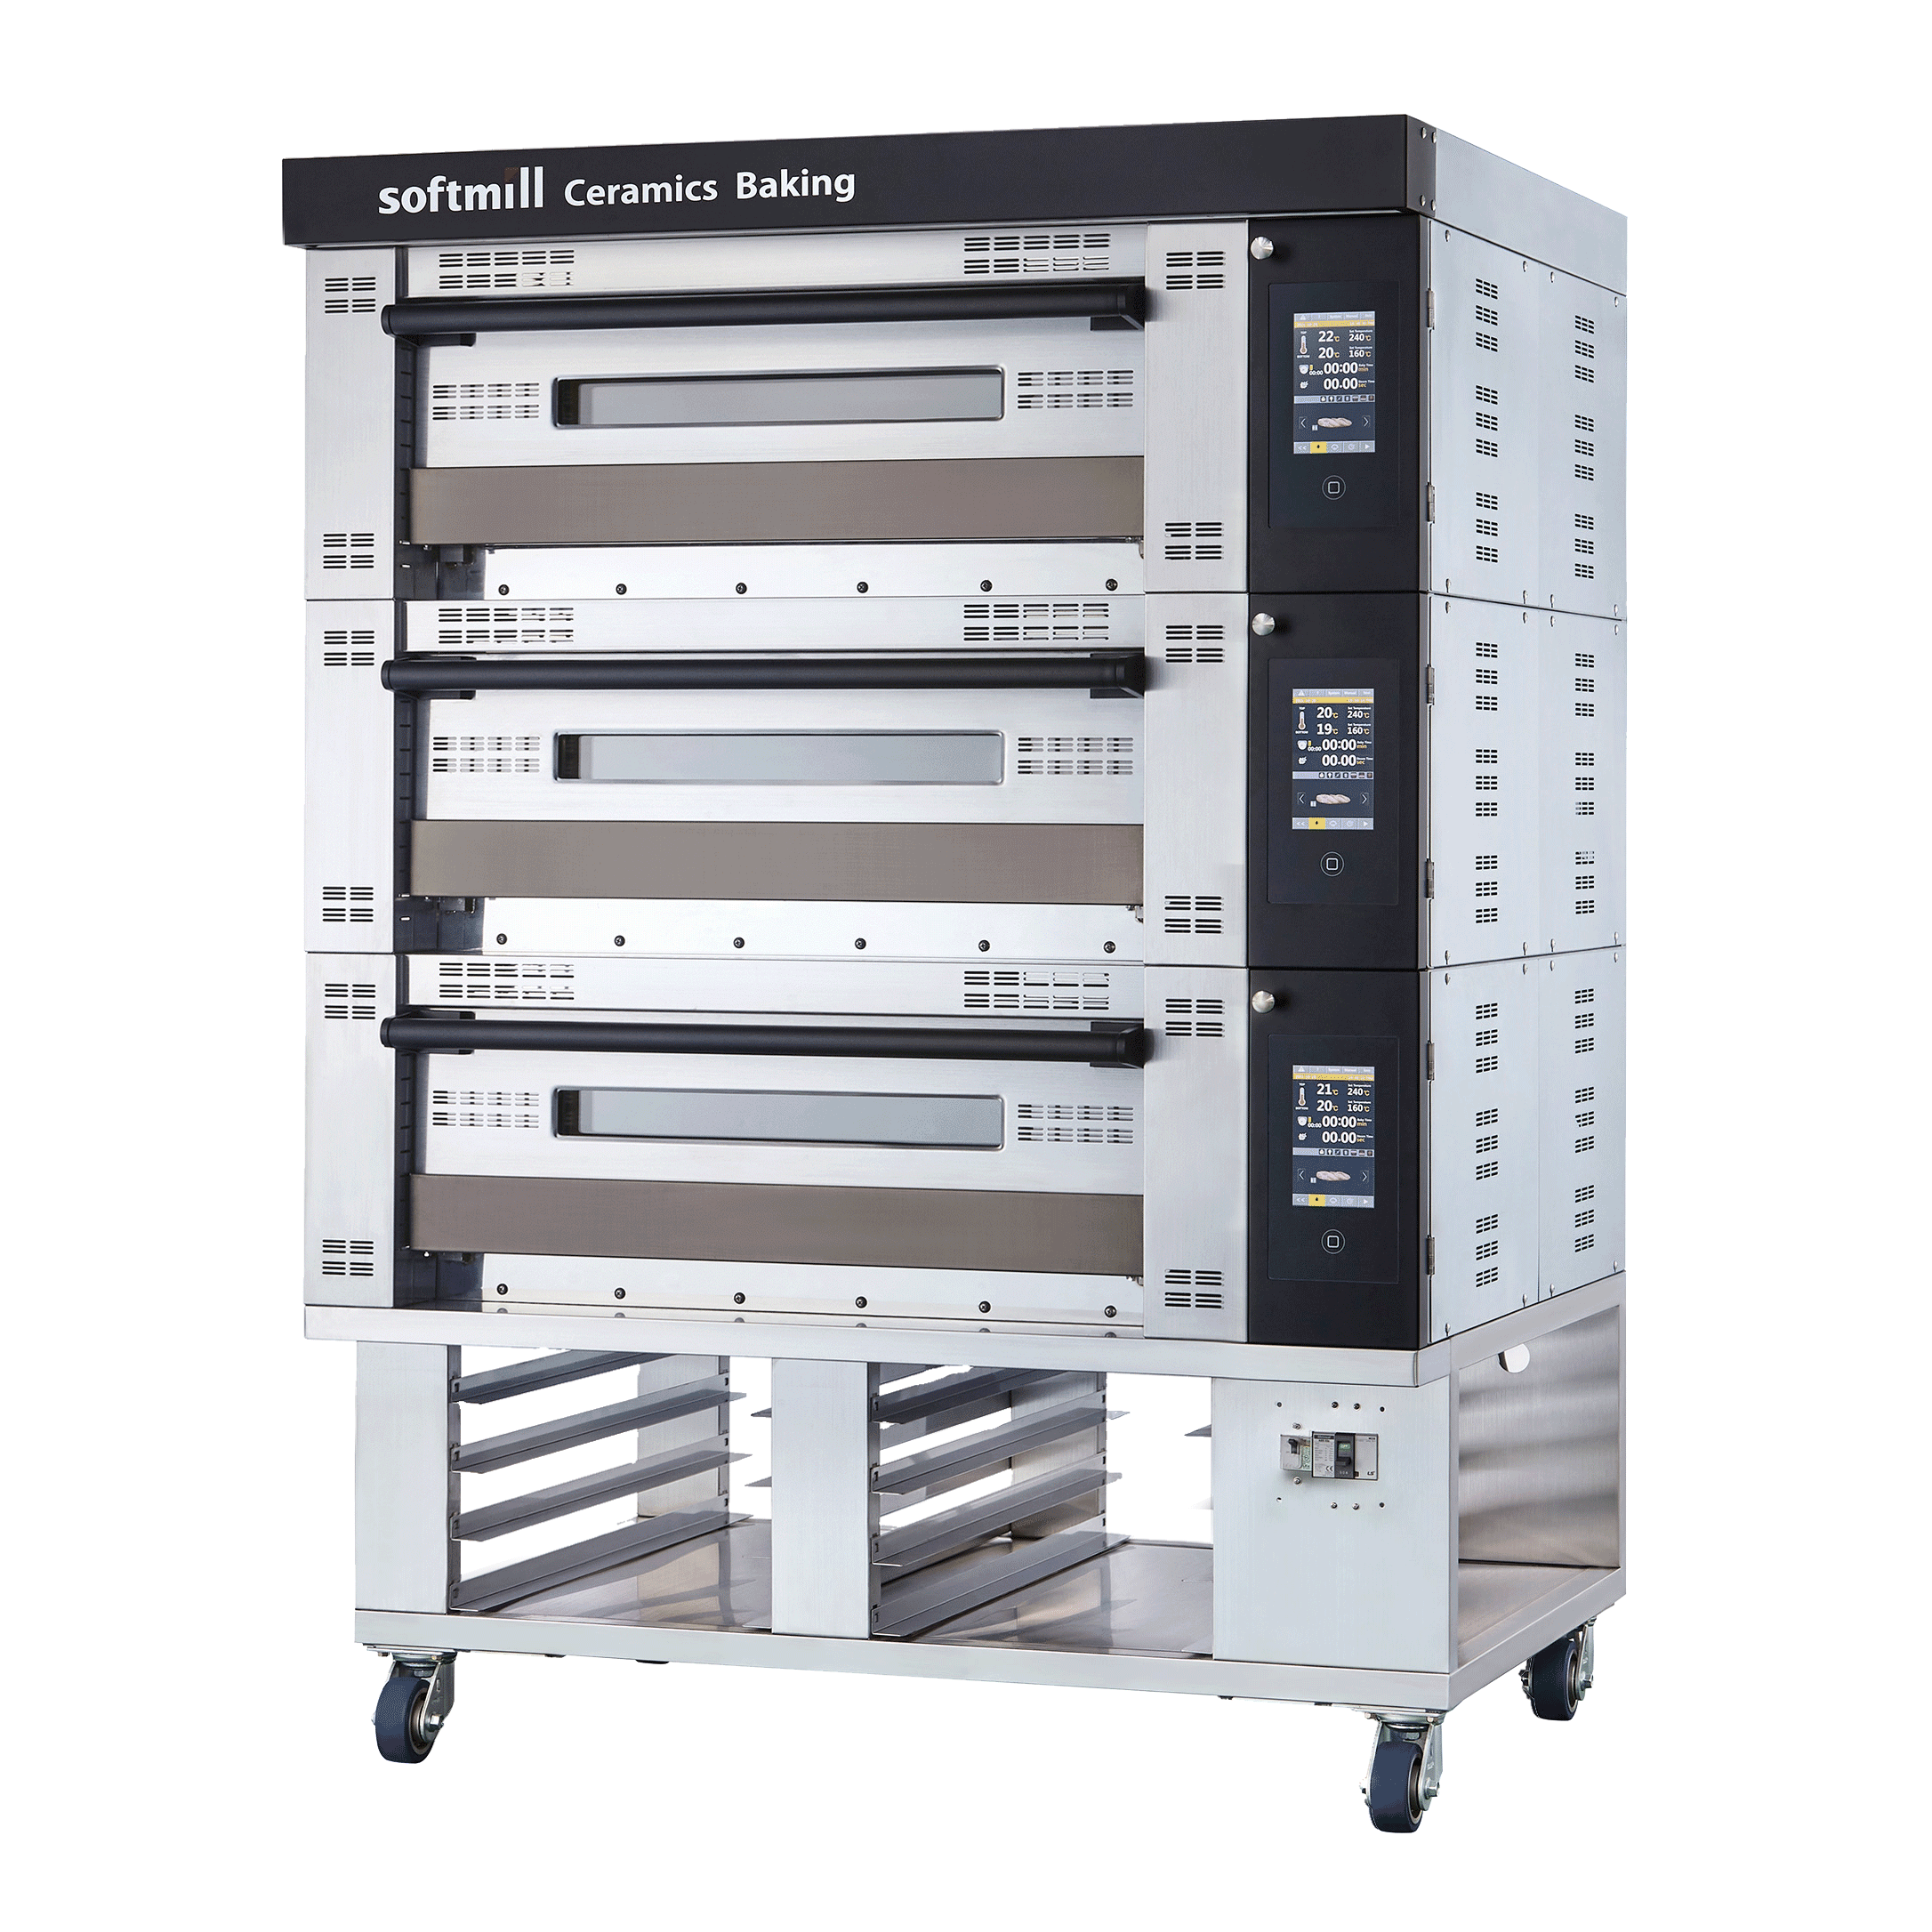 Convergence Oven 2 trays 3 tiers detail page link